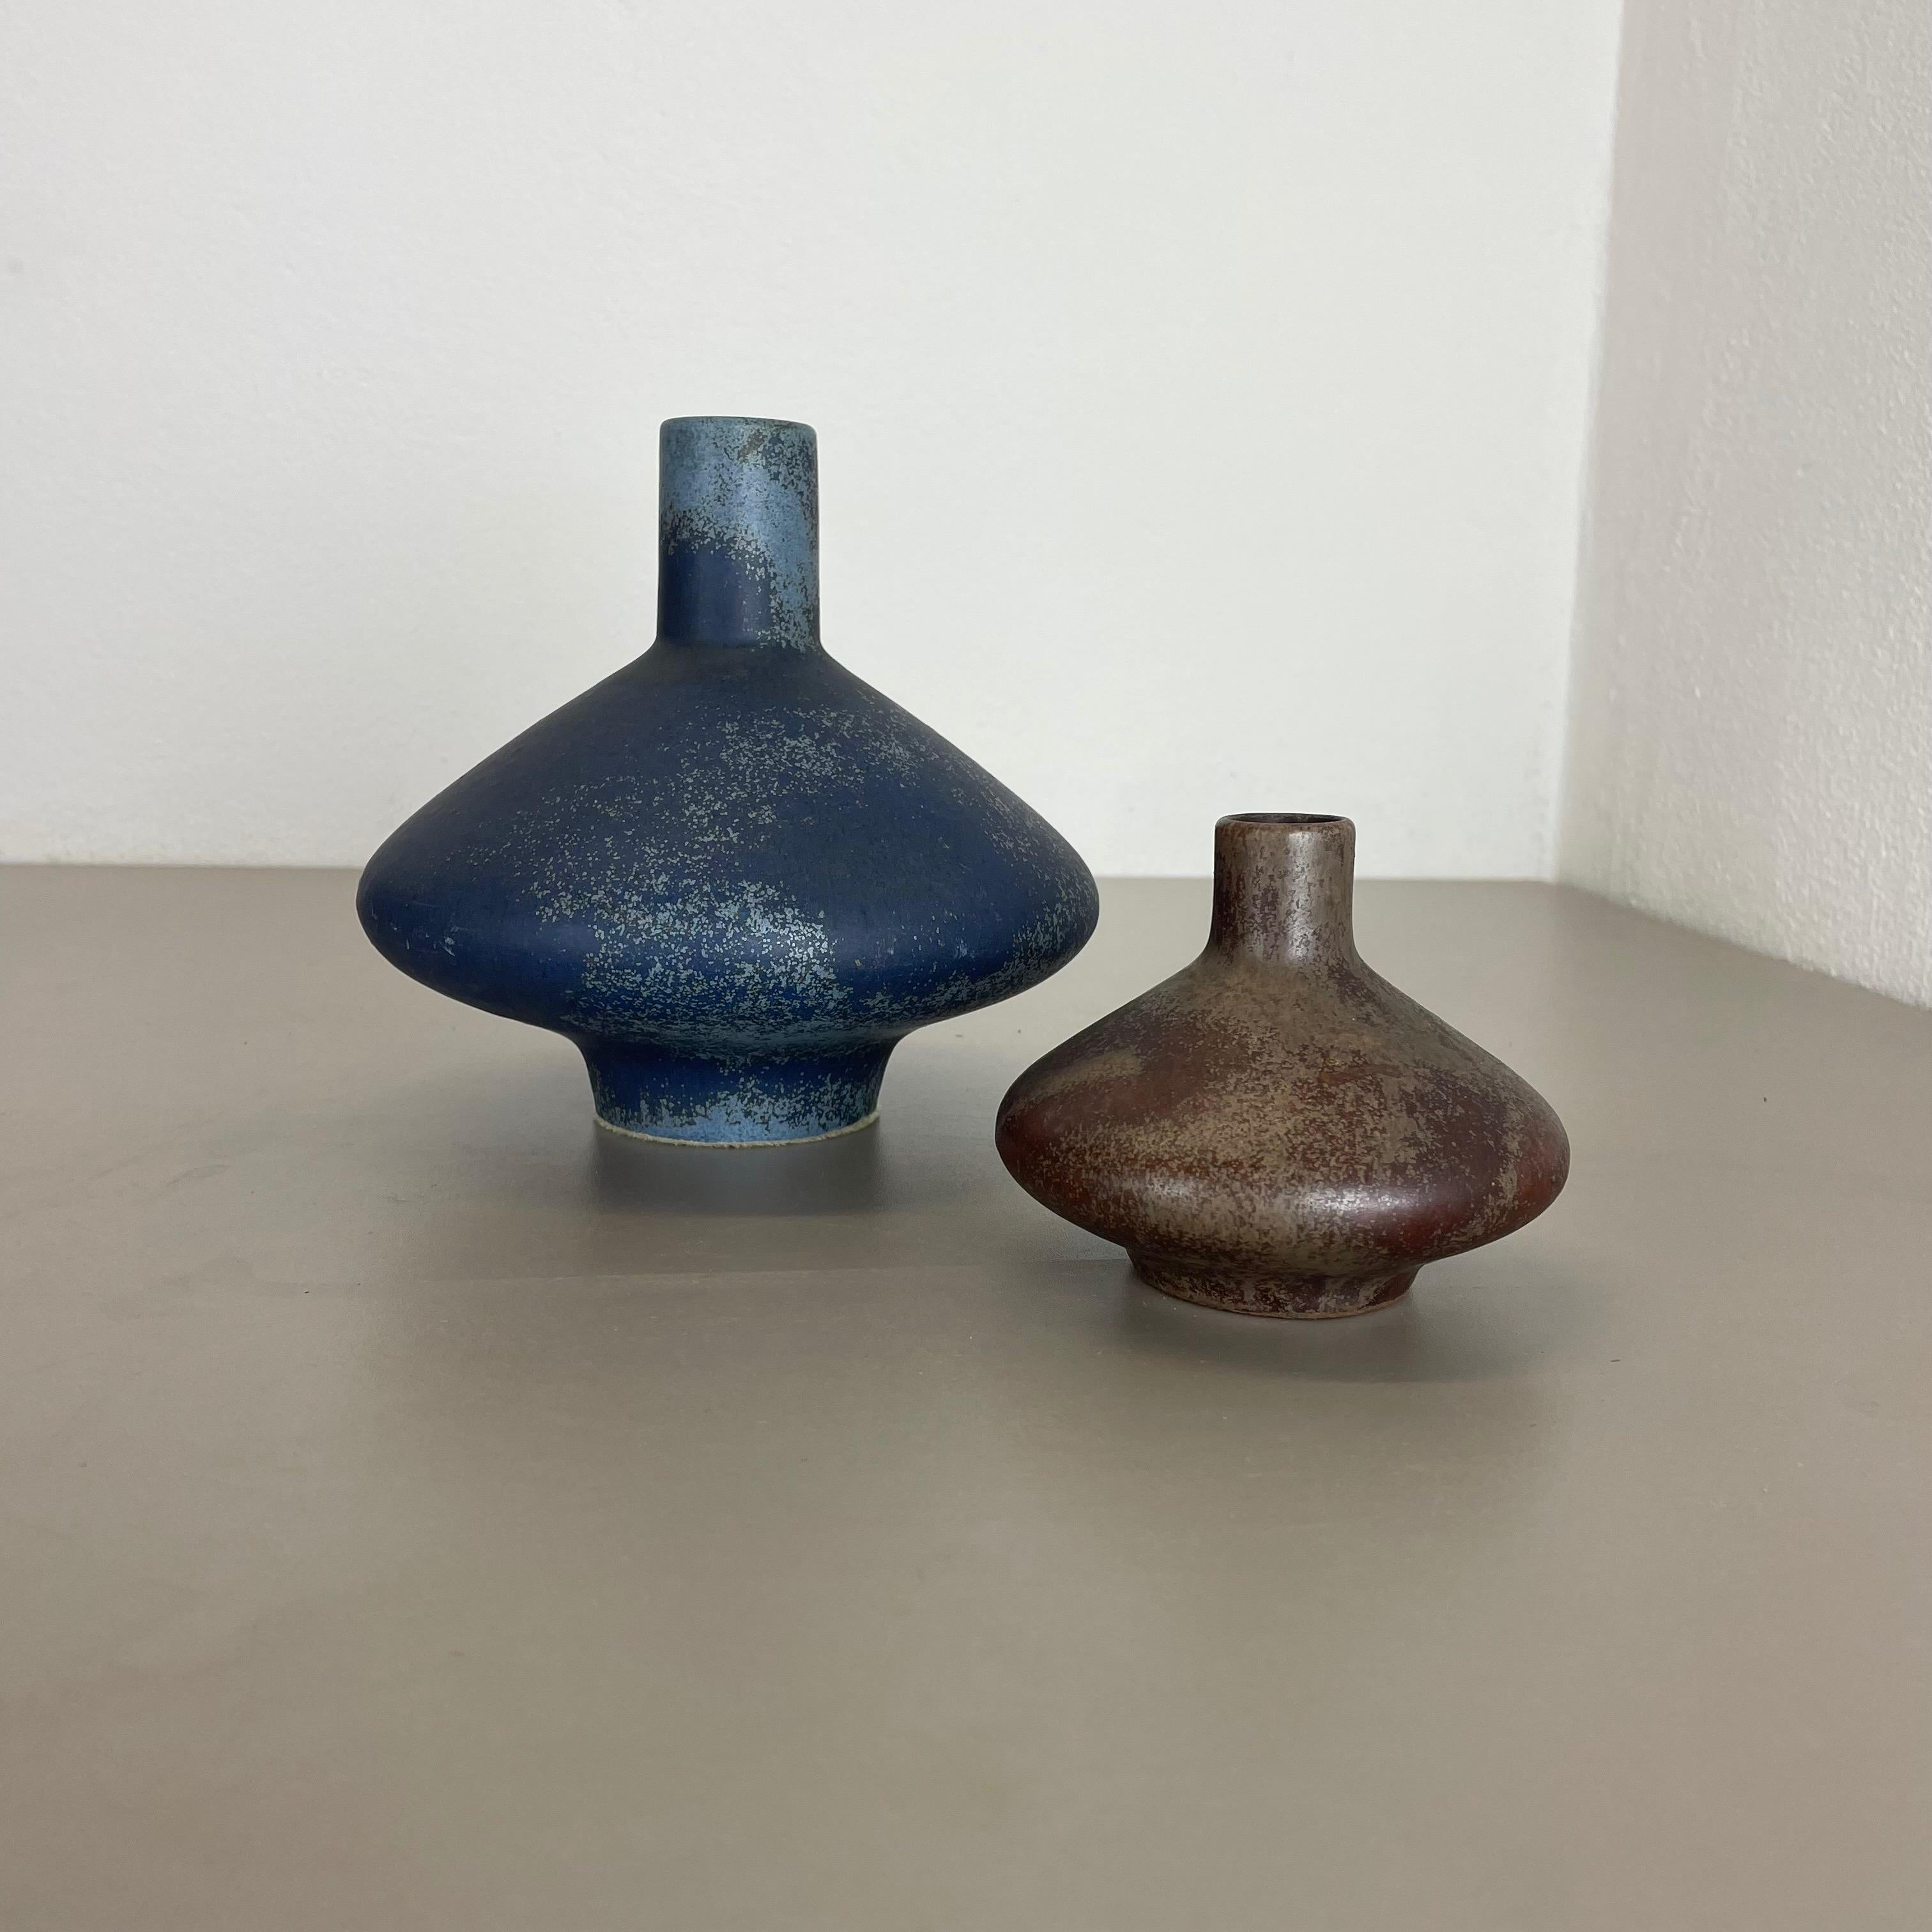 Article:

Ceramic objects set of 2


Designer and producer:

Otto Keramik, Germany



Decade:

1970s


This original vintage Studio Pottery objects were designed and produced by Otto Keramik in the 1970s in Germany. It is made of